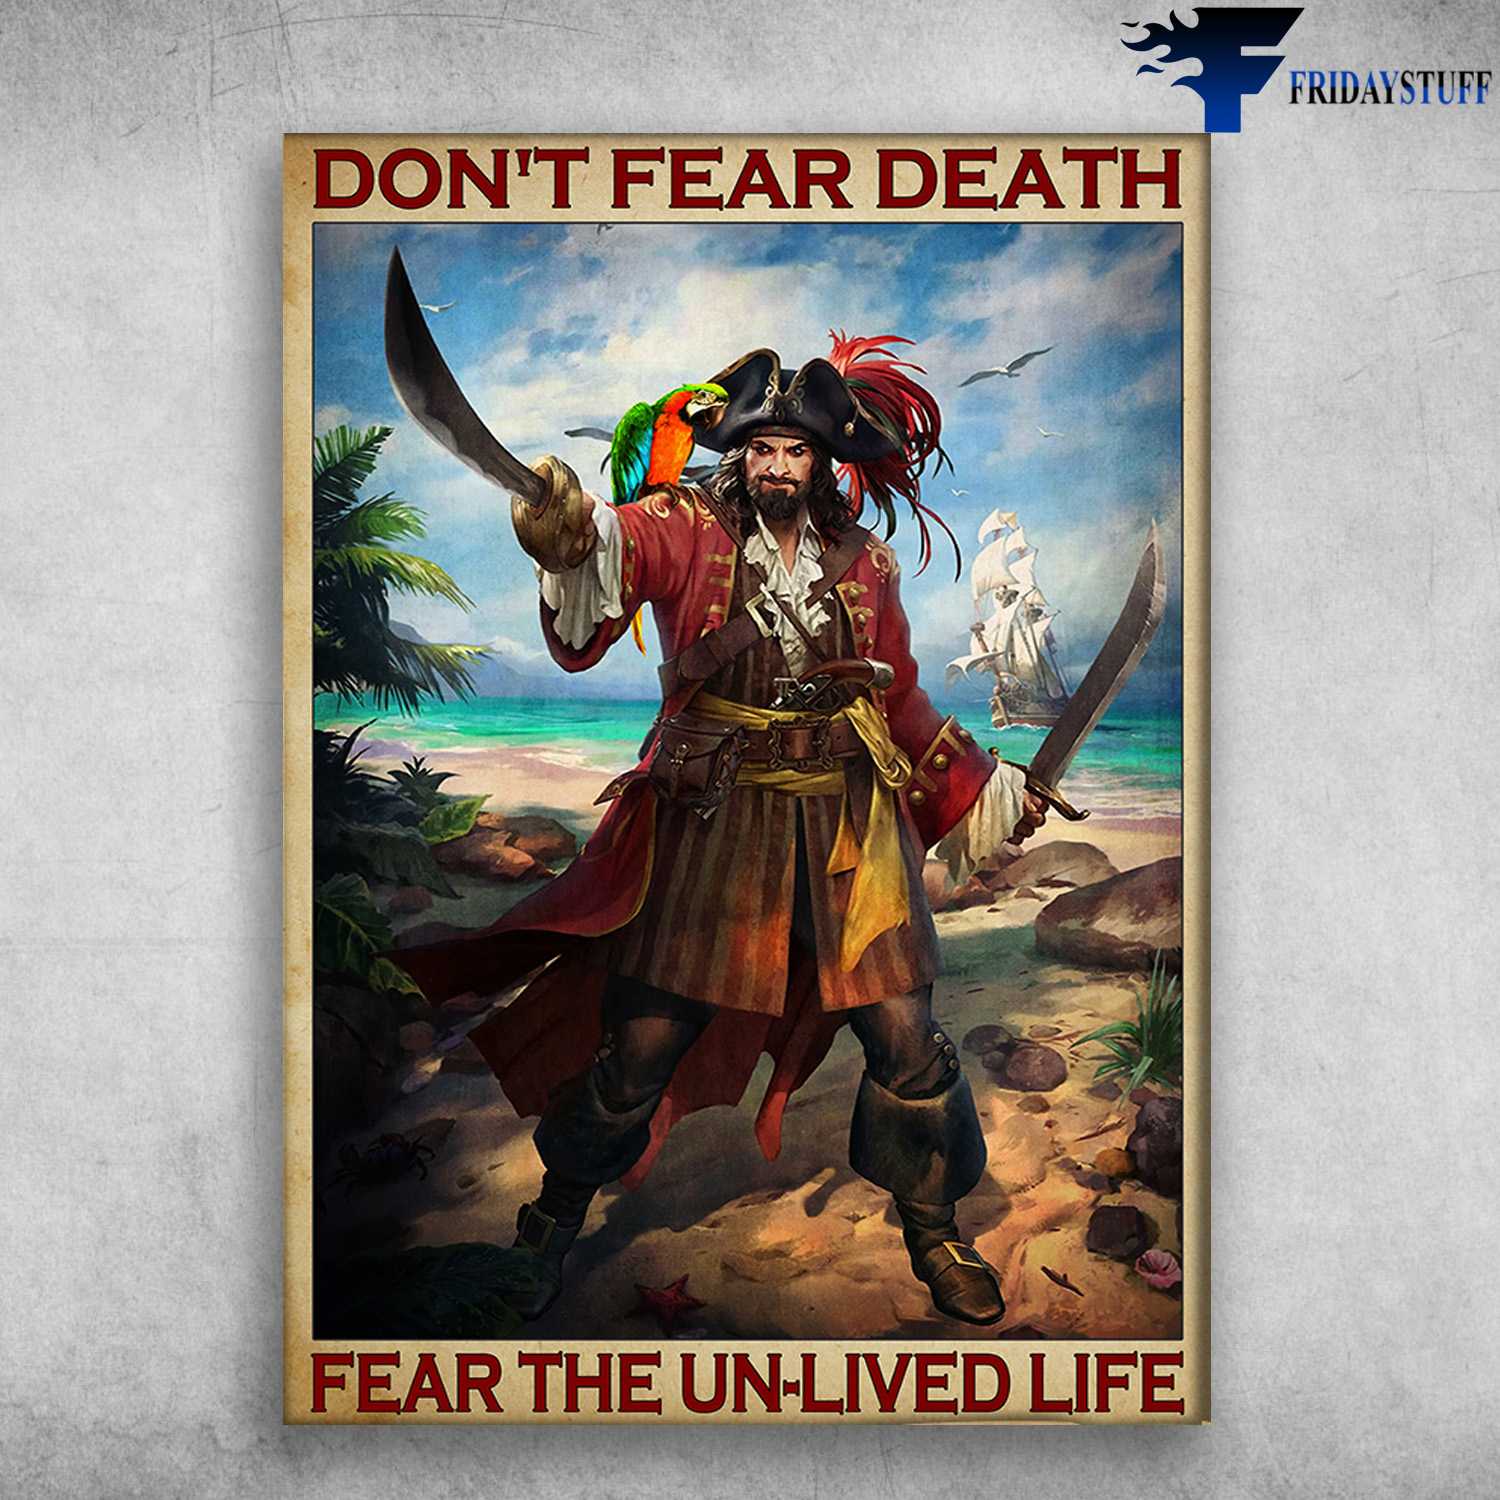 Pirate And Parrot, Saiboath Pirate, Sailboat Pirate - Don't Fear Death, Fear The Un-Lived Life